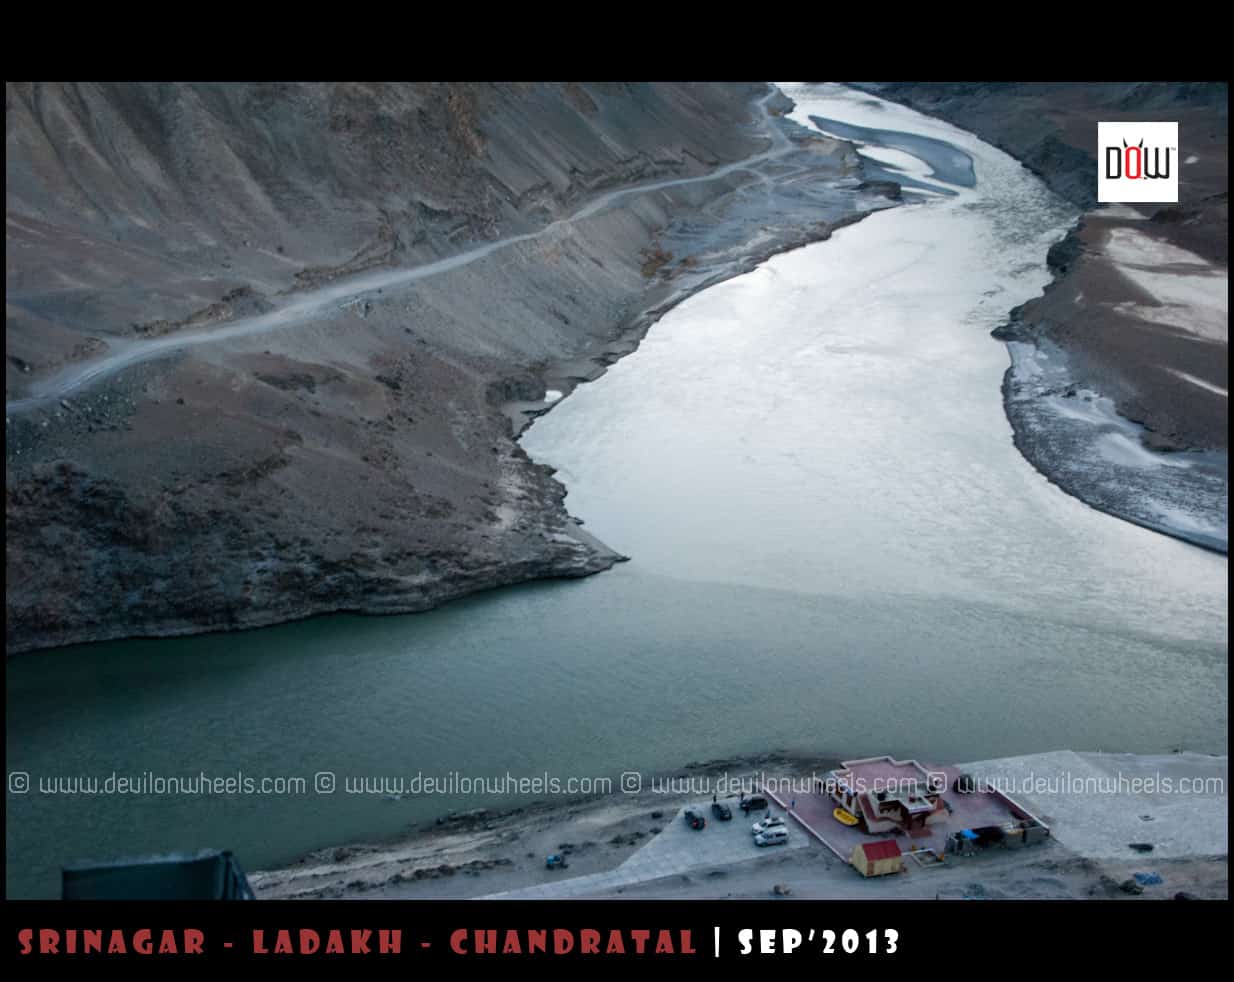 Confluence of Indus and Zanskar River